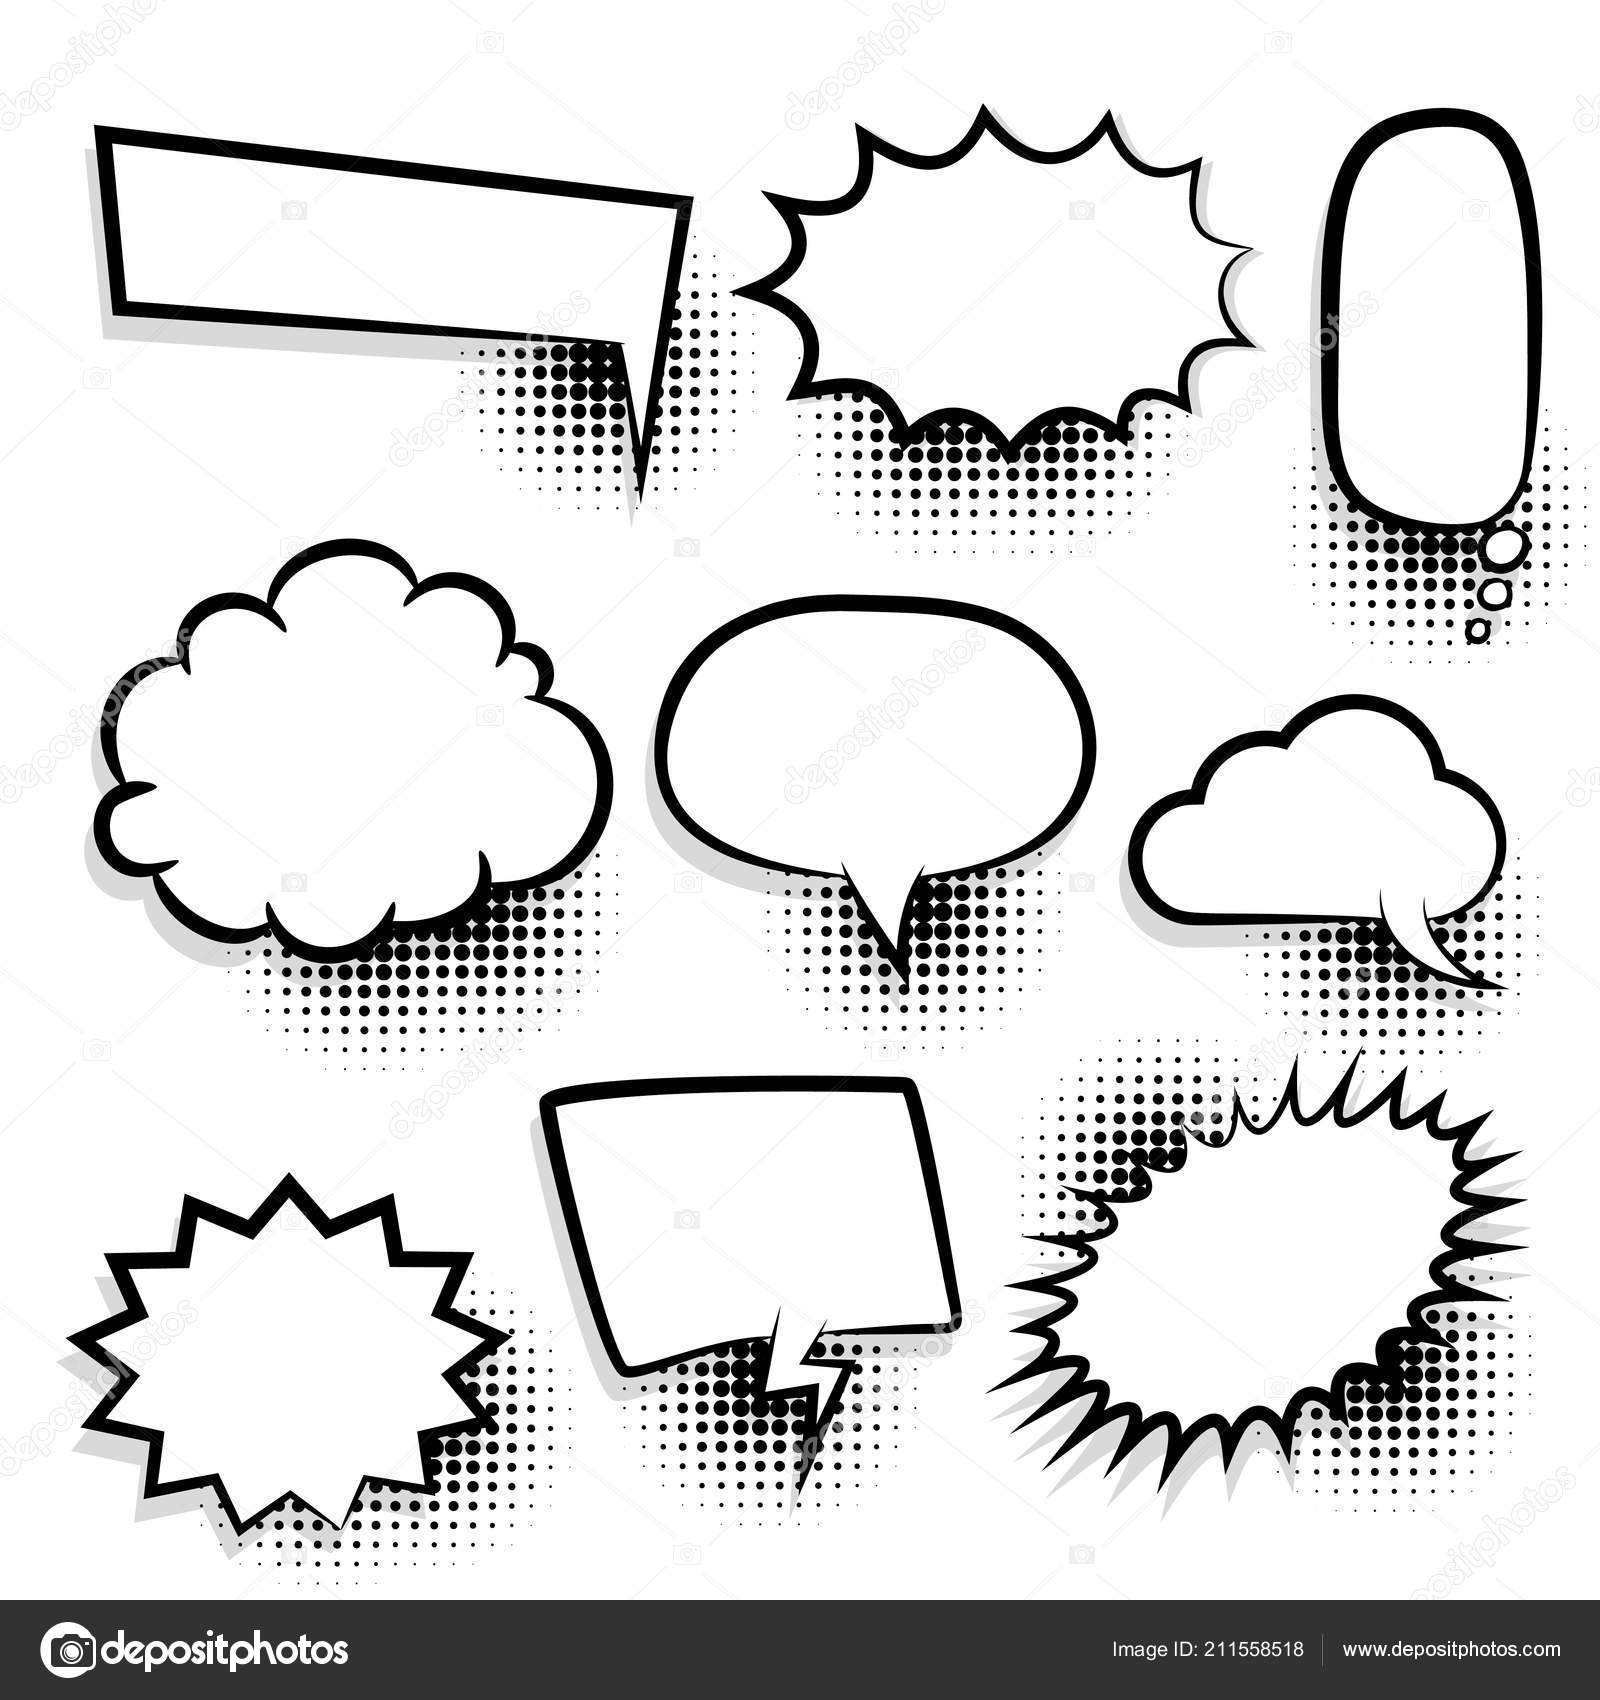 Blank comic book mock up with empty speech bubbles